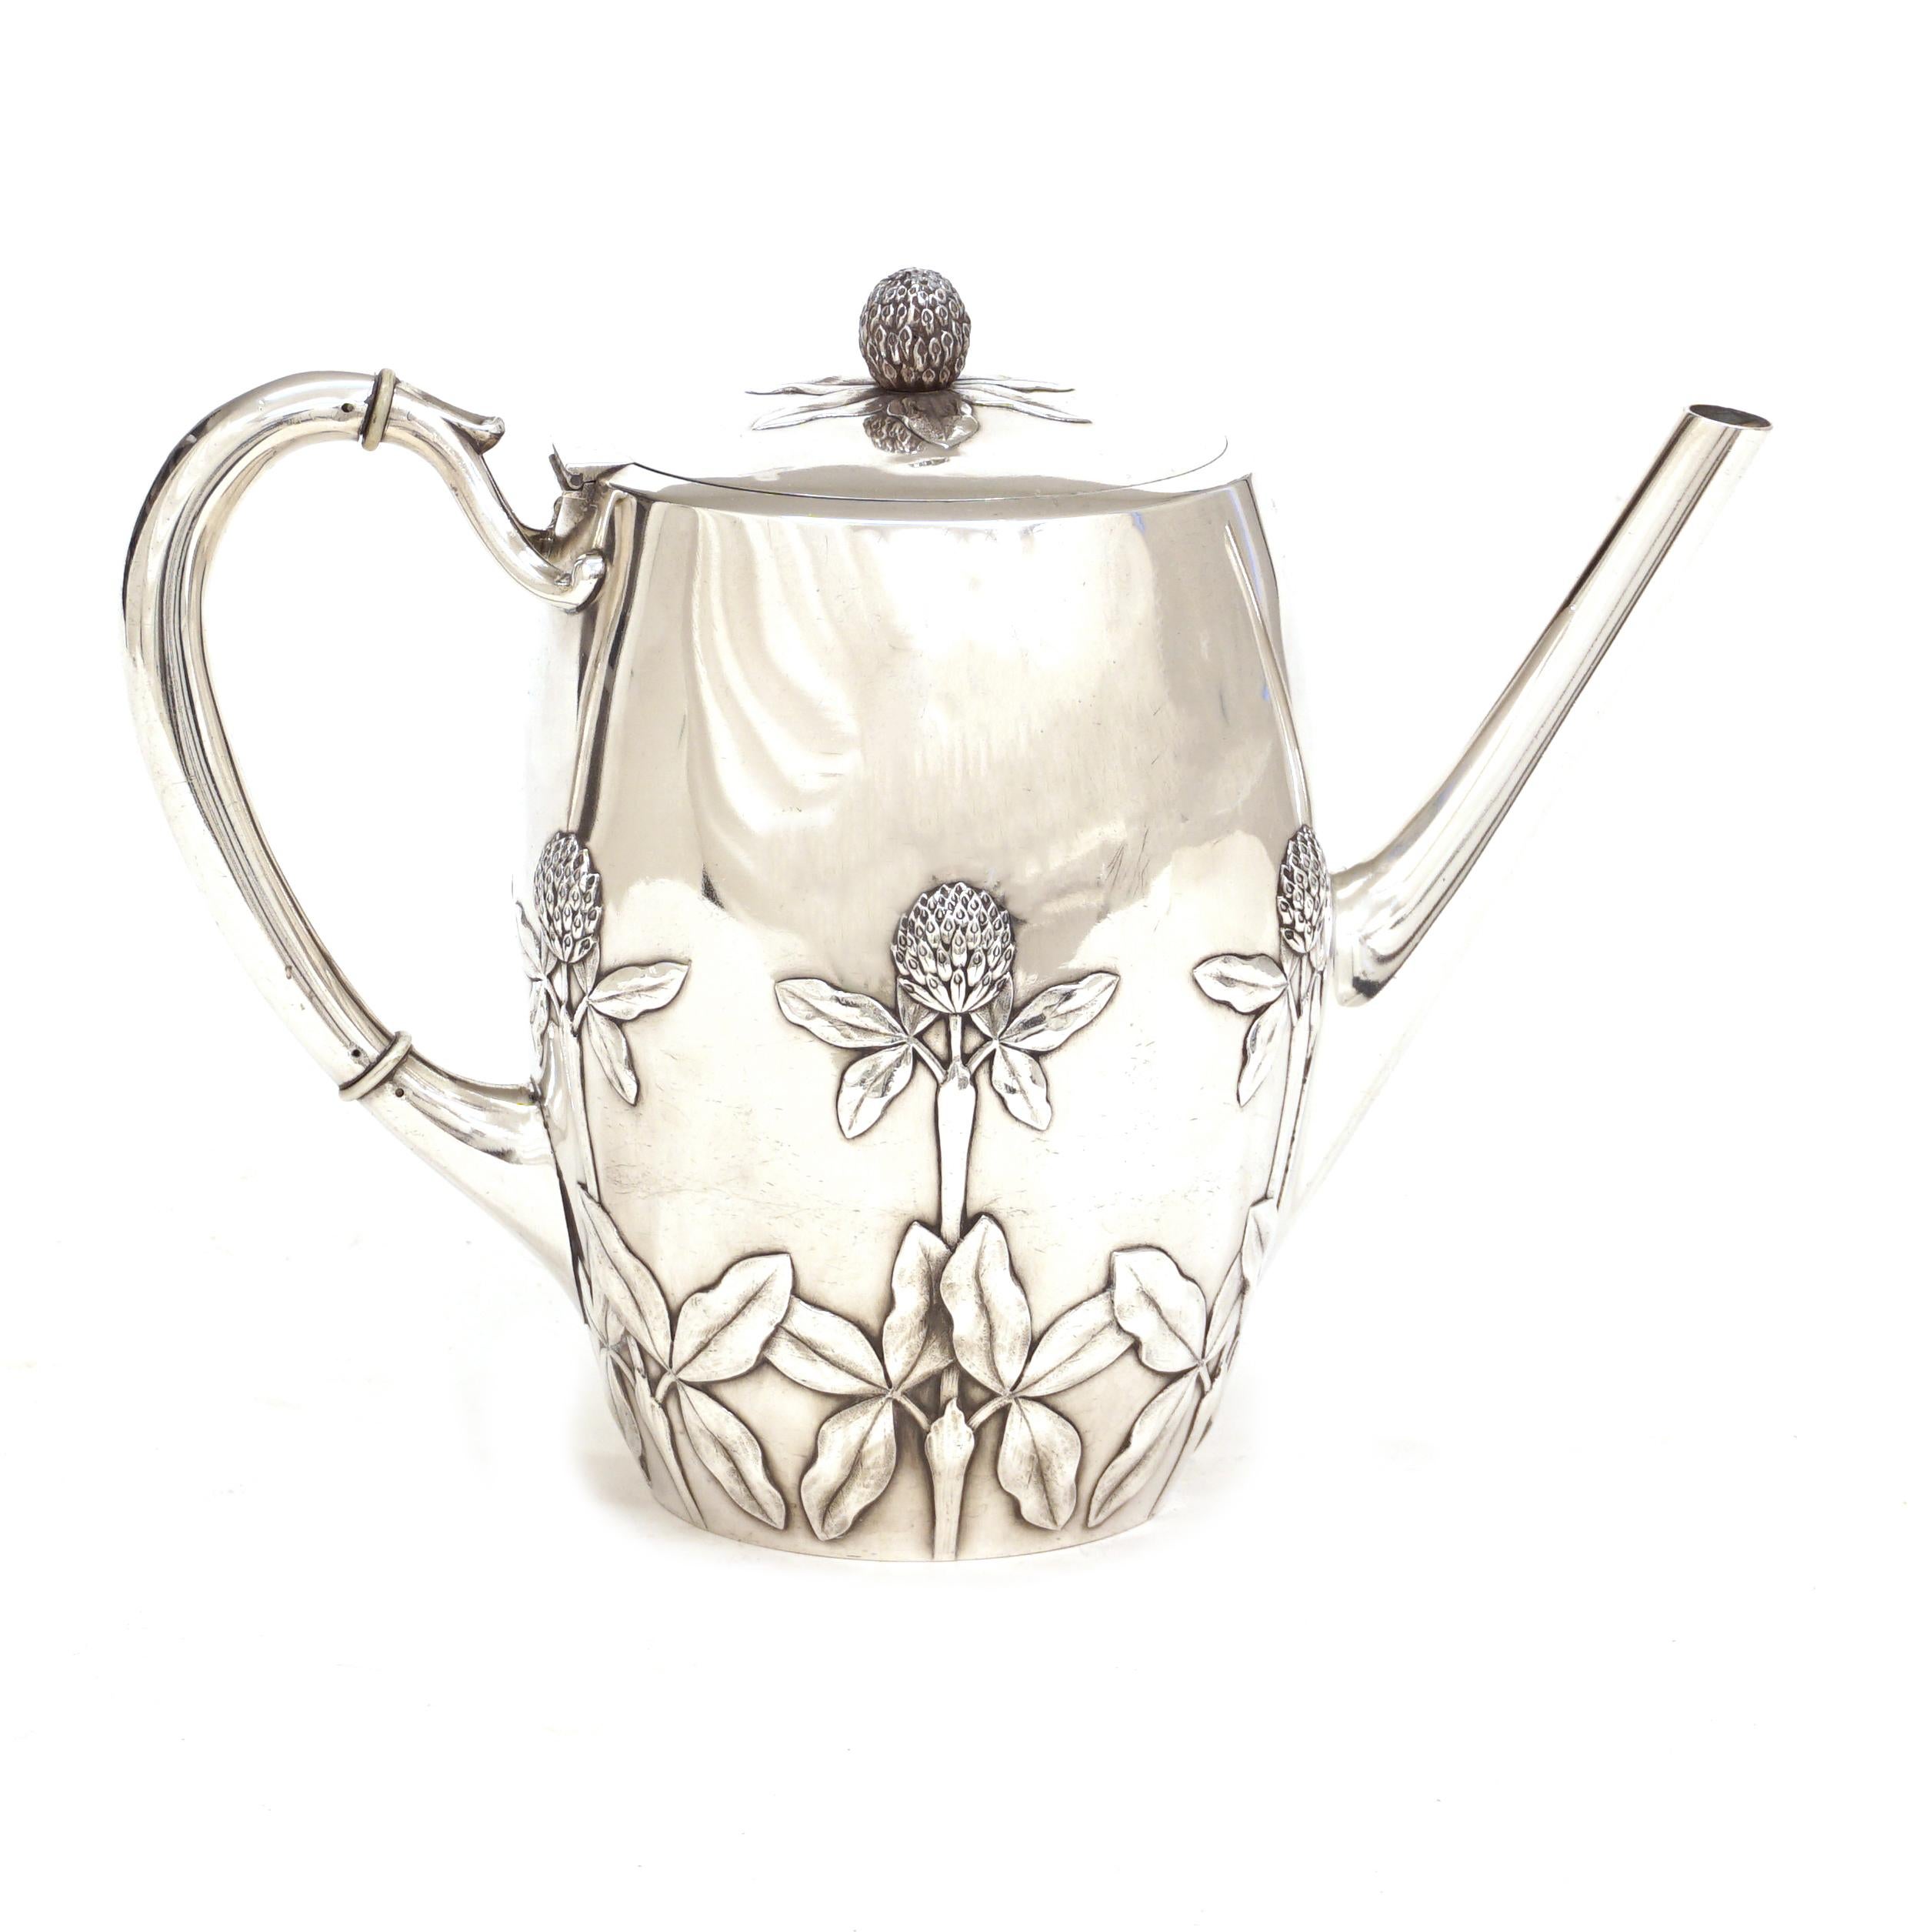 A very rare and complete sterling silver coffee and tea set in the manner of N. G. Henriksen, 1855-1922, leading silversmith at A. Michelsen, Copenhagen, 1888-1922. Henriksen was inspired by the Danish nature and created this coffee and tea set with